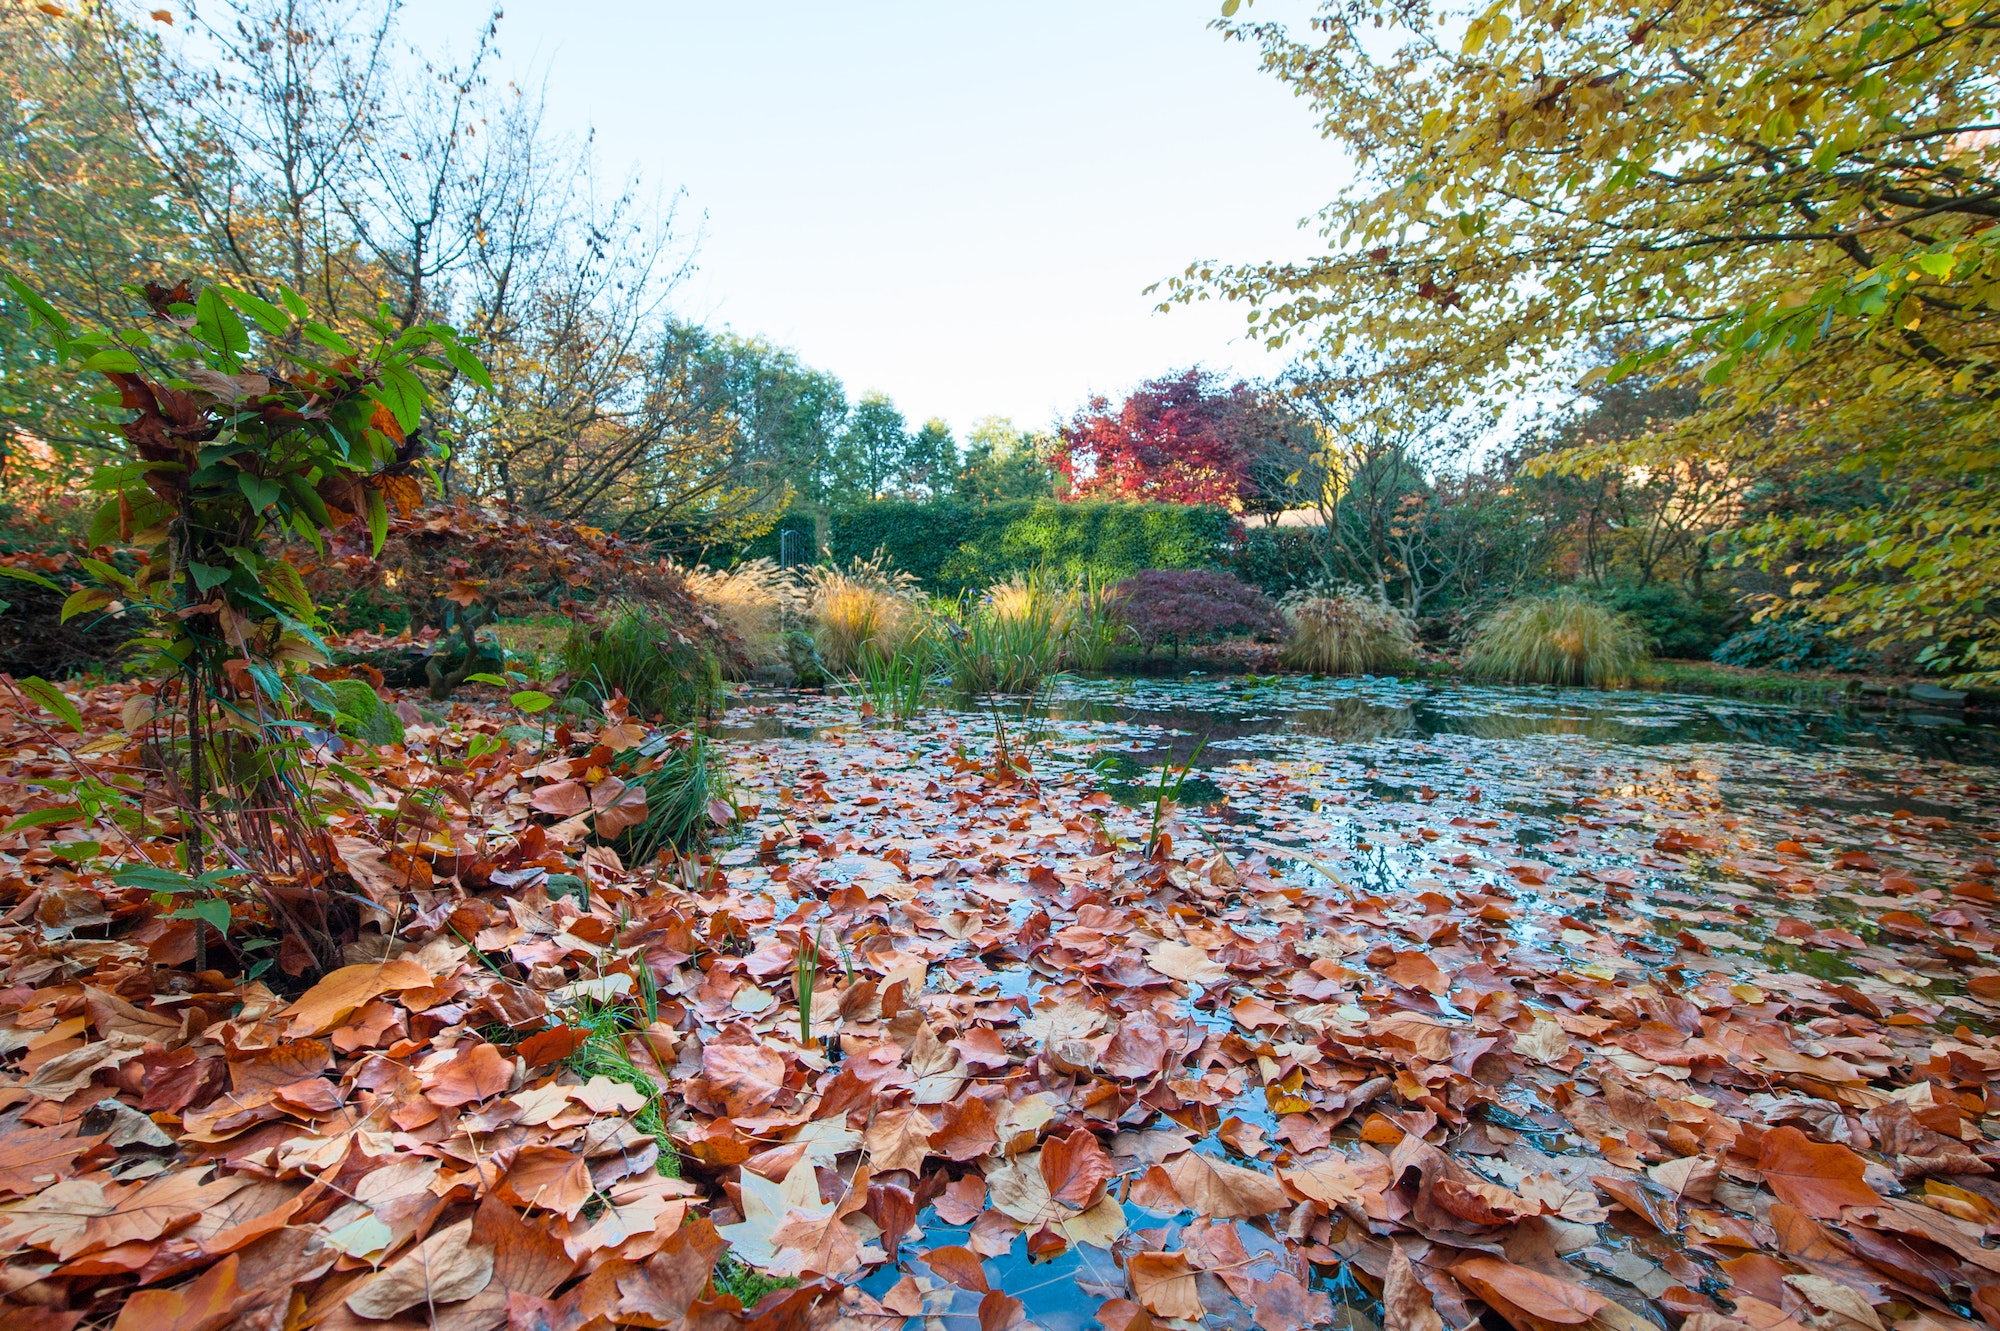 Pond with many fallen leaves